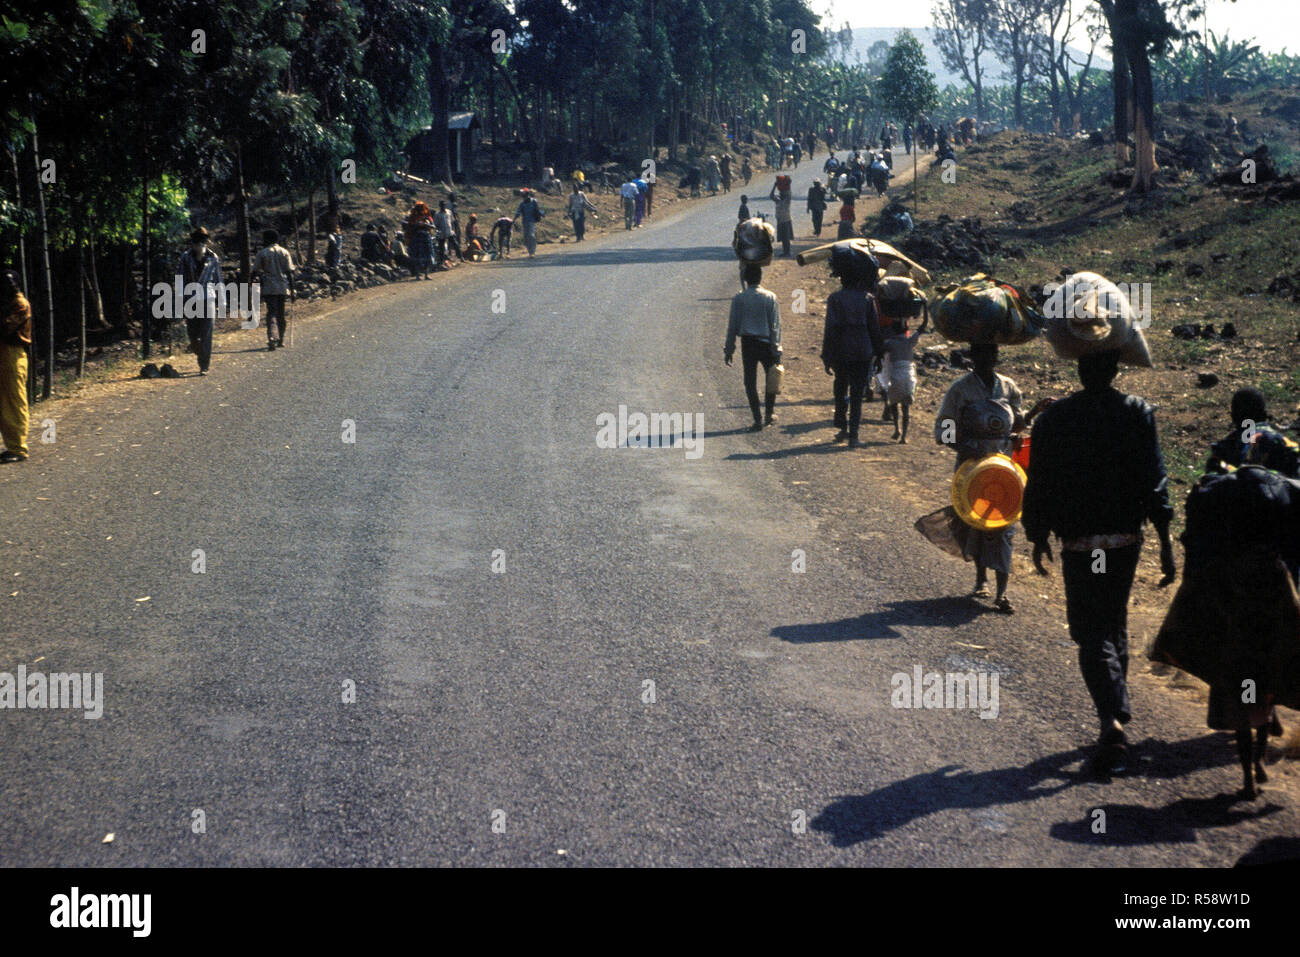 1994 Rwandan refugees enter Goma Zaire after a civil war erupted in their country. Stock Photo